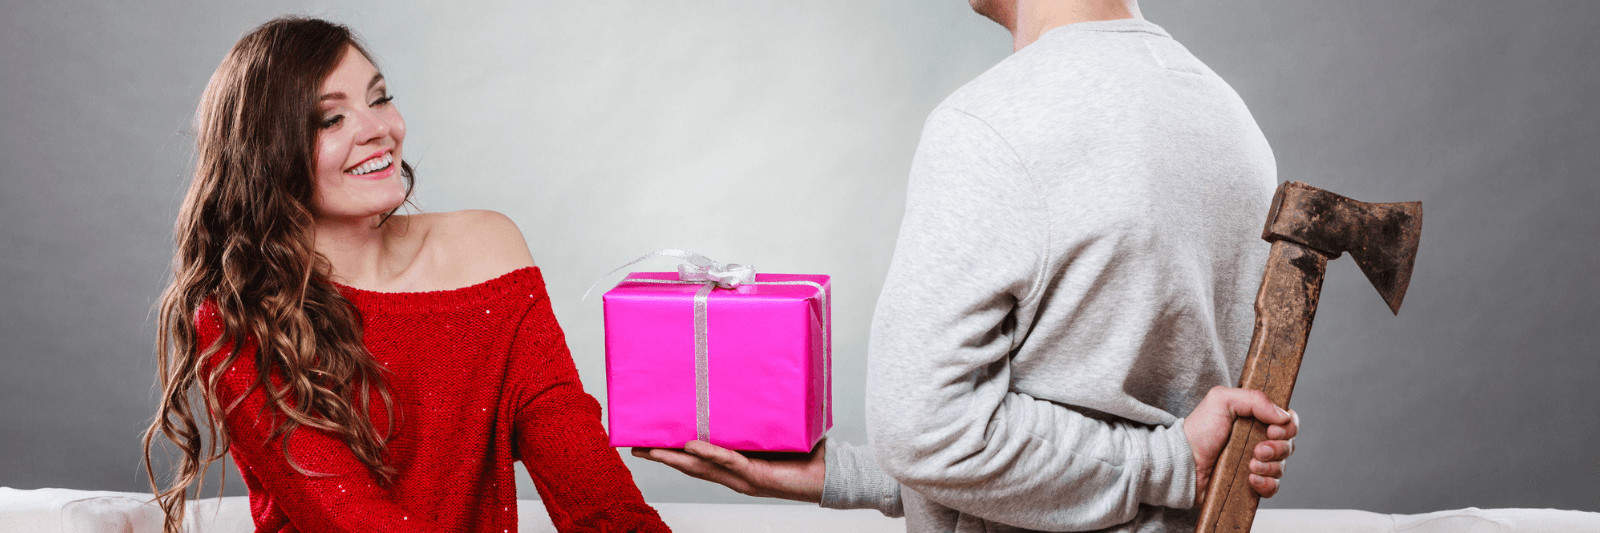 evil gift ideas for someone you secretly hate